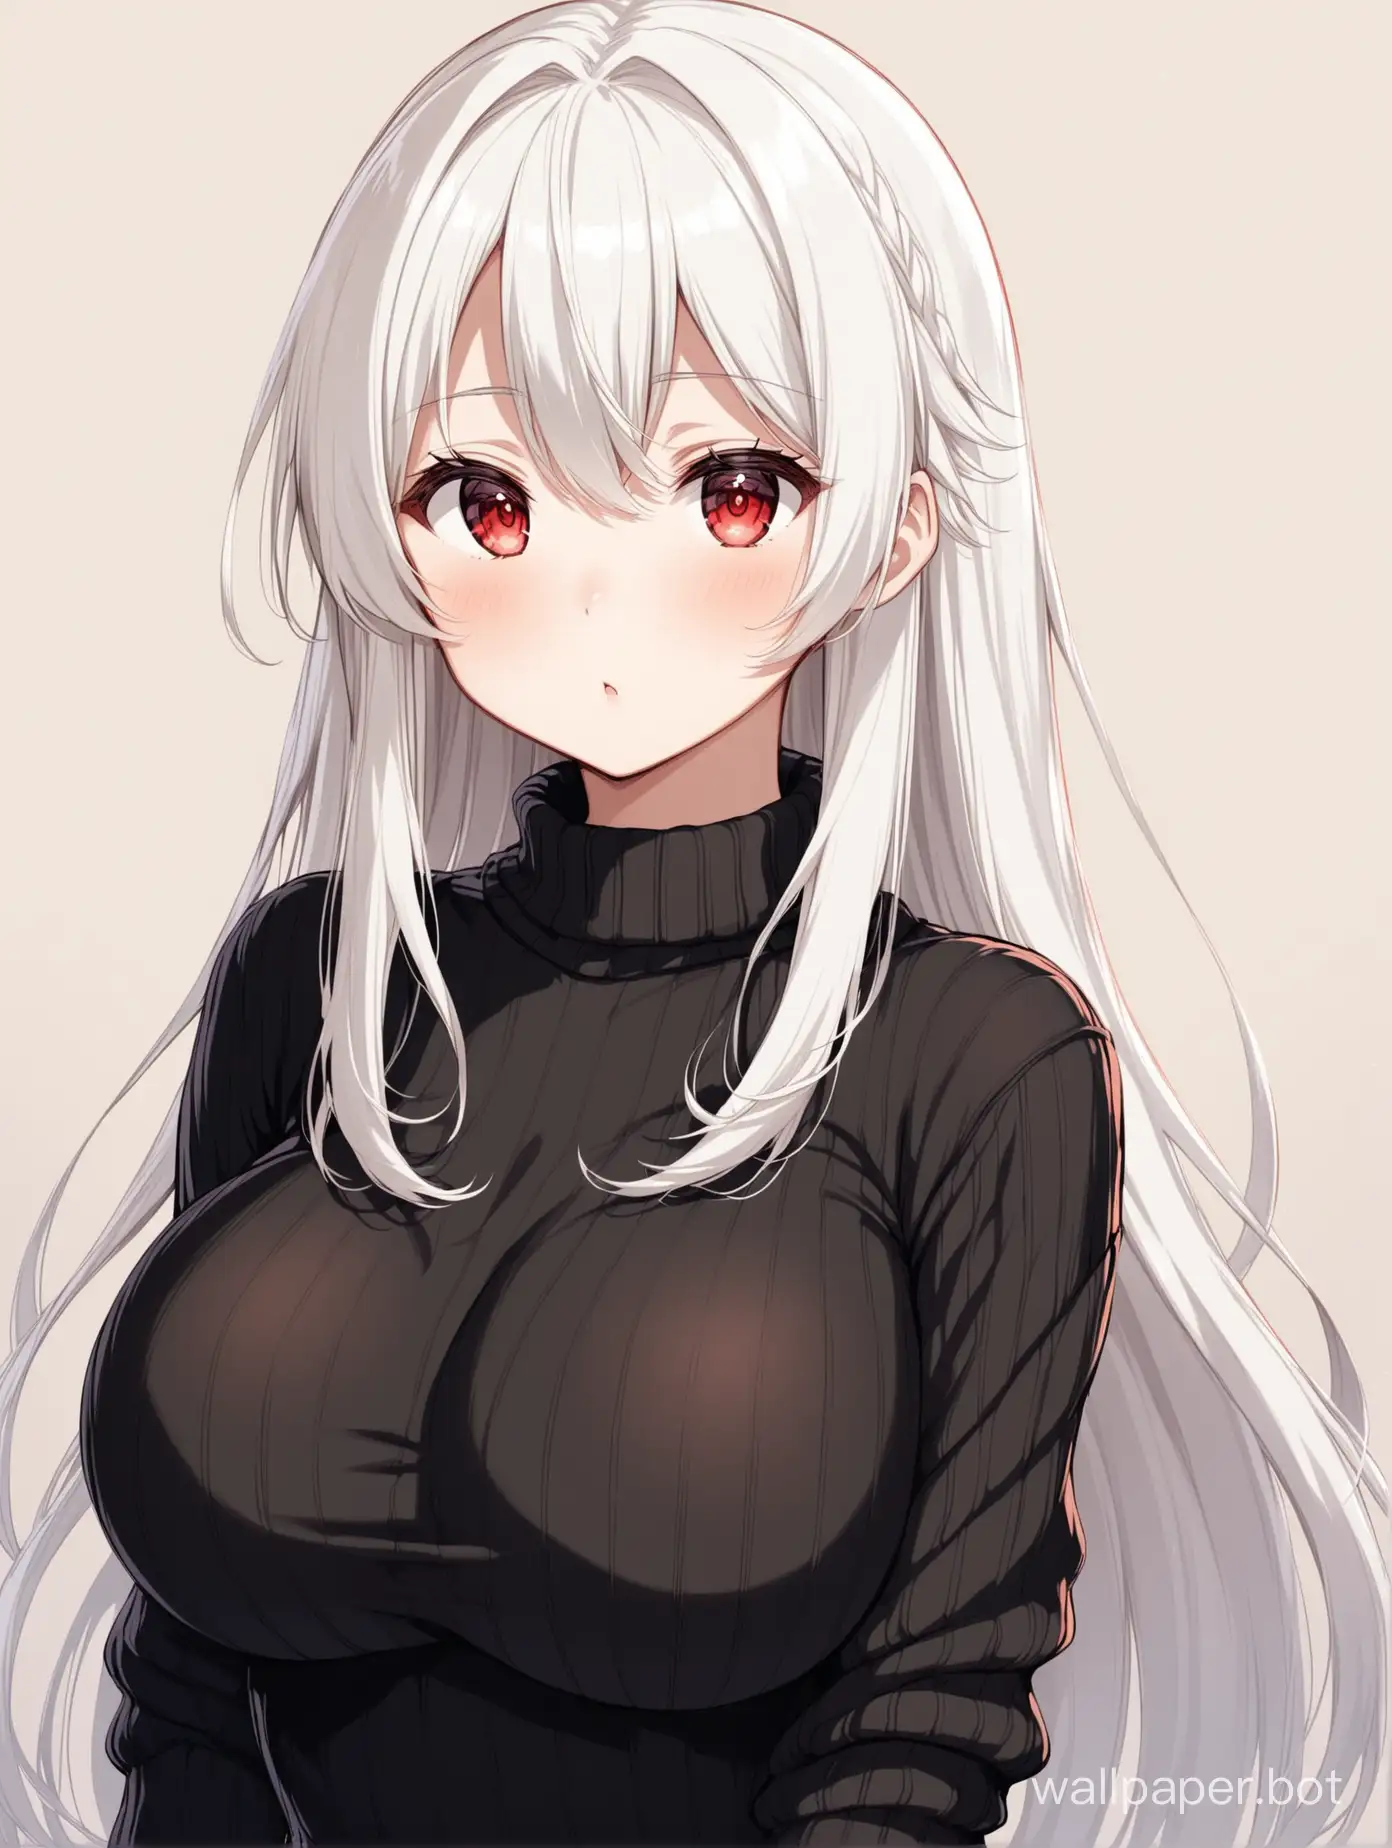 Cute young anime girl with white hair, red eyes and black warm sweater. She has very beautiful figure and large boobs